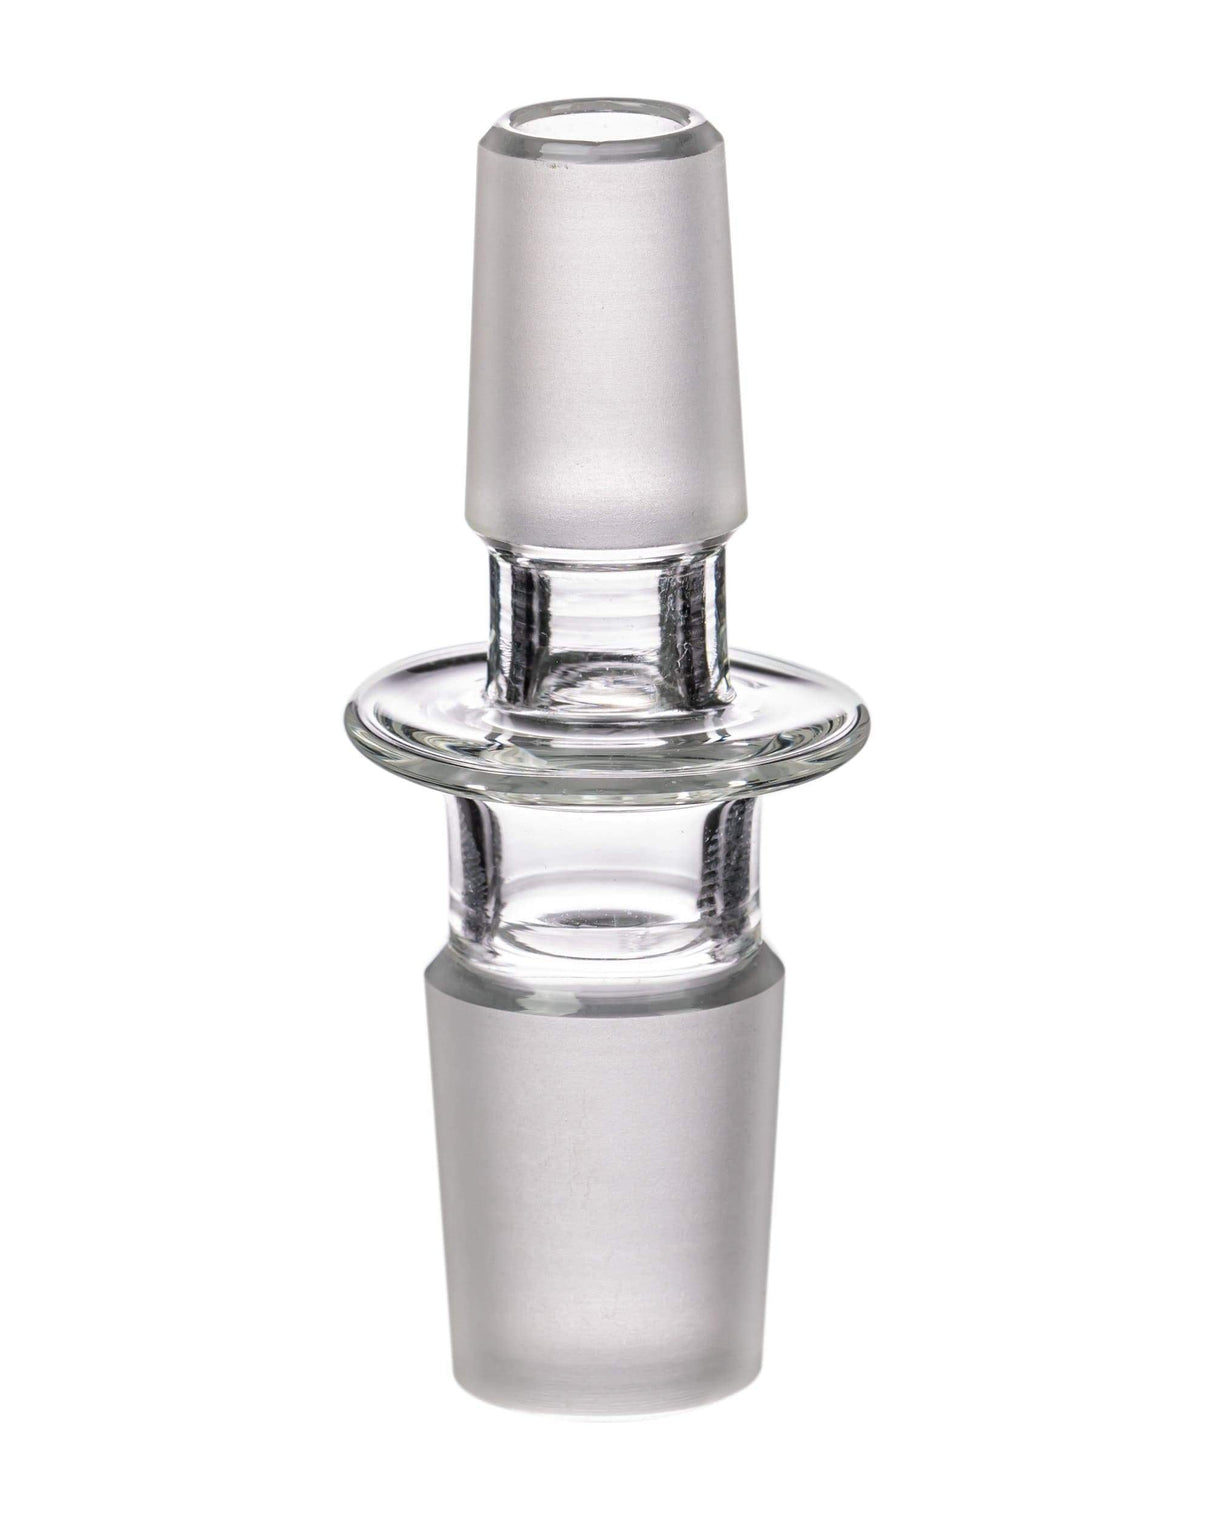 GRAV Male to Male Joint Adapter, clear borosilicate glass, 18mm to 14mm, front view on white background